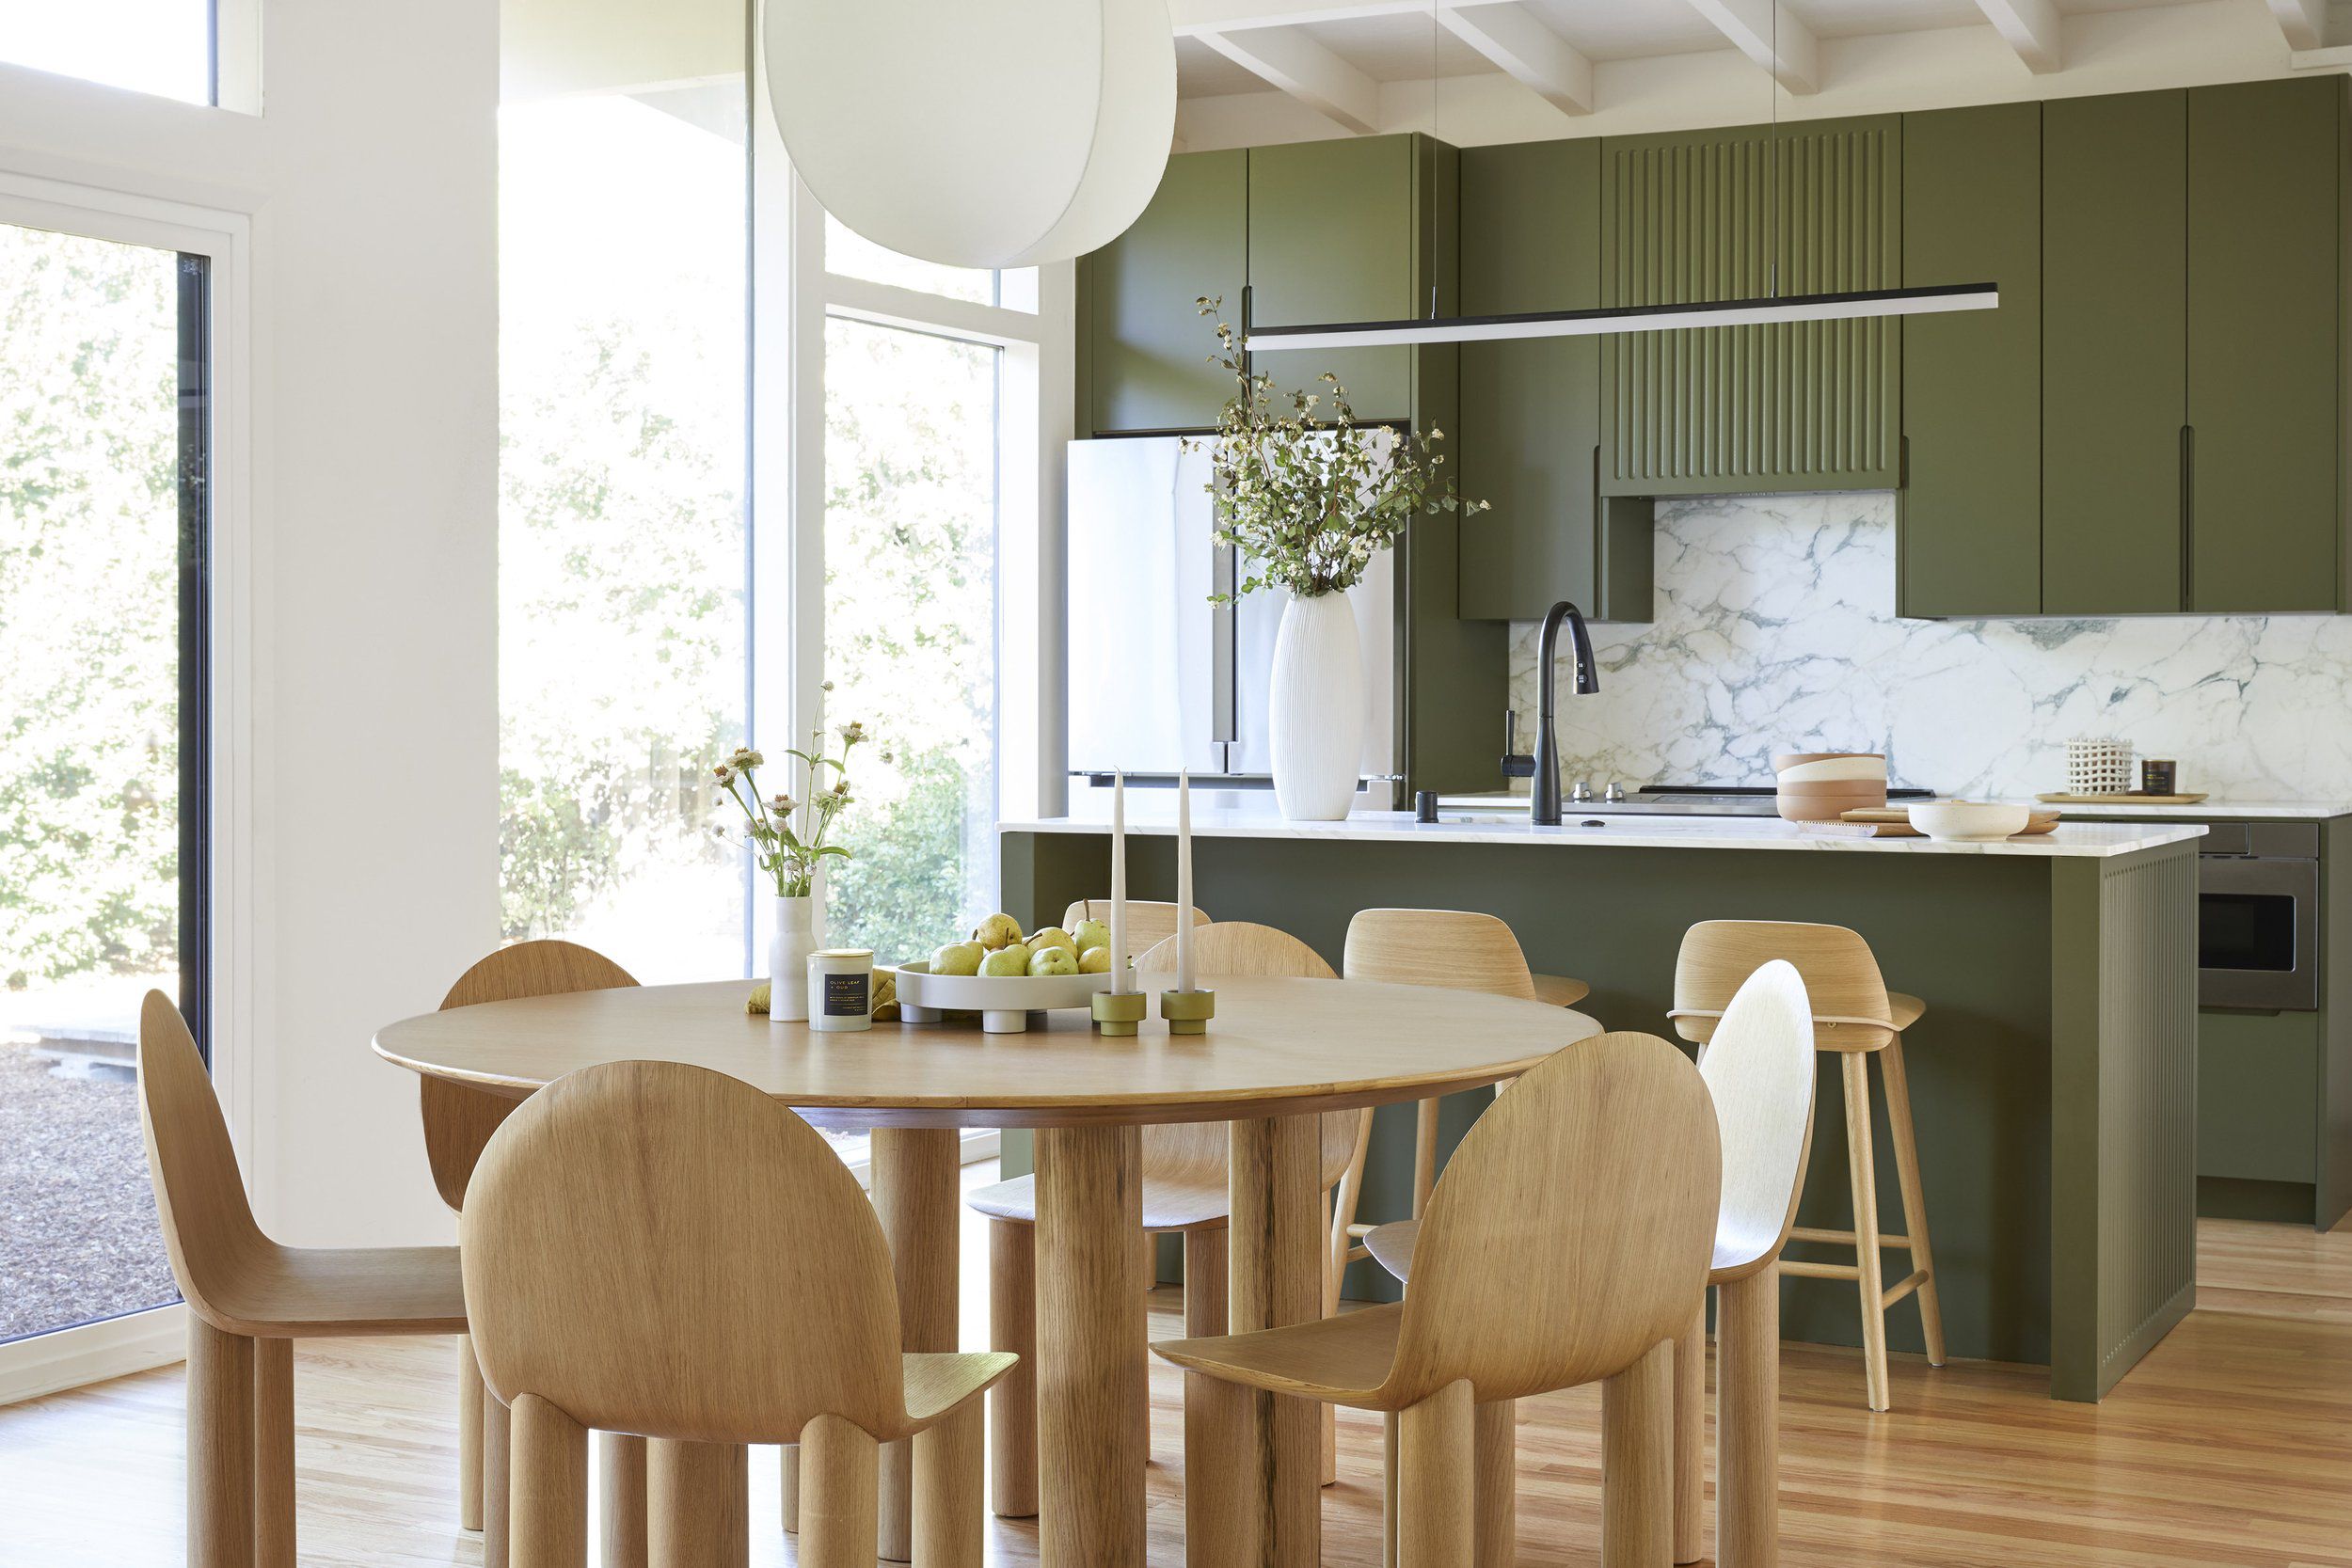 Olive Green + Light Wood, Airy and Natural